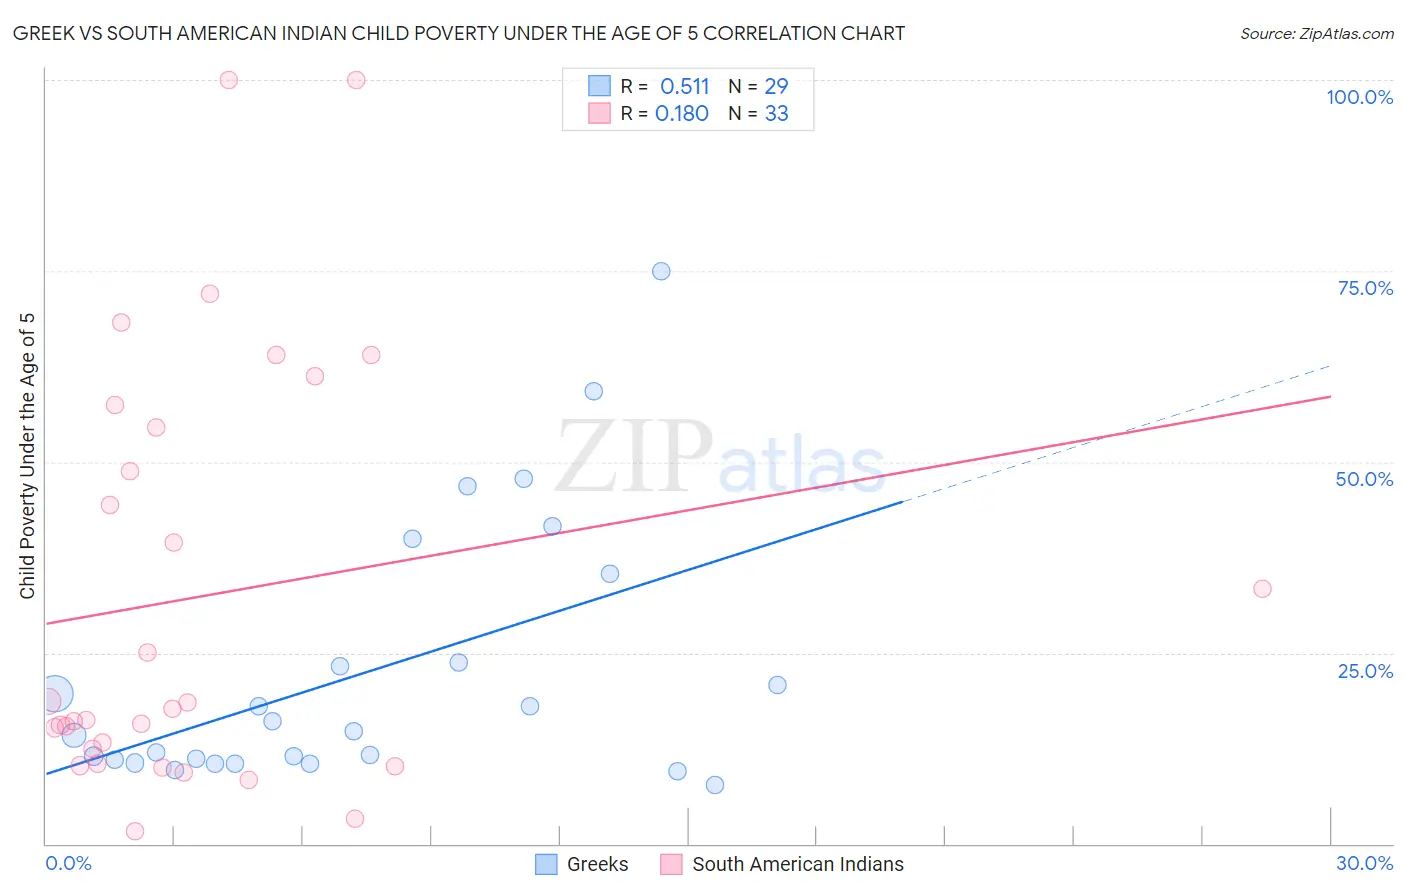 Greek vs South American Indian Child Poverty Under the Age of 5